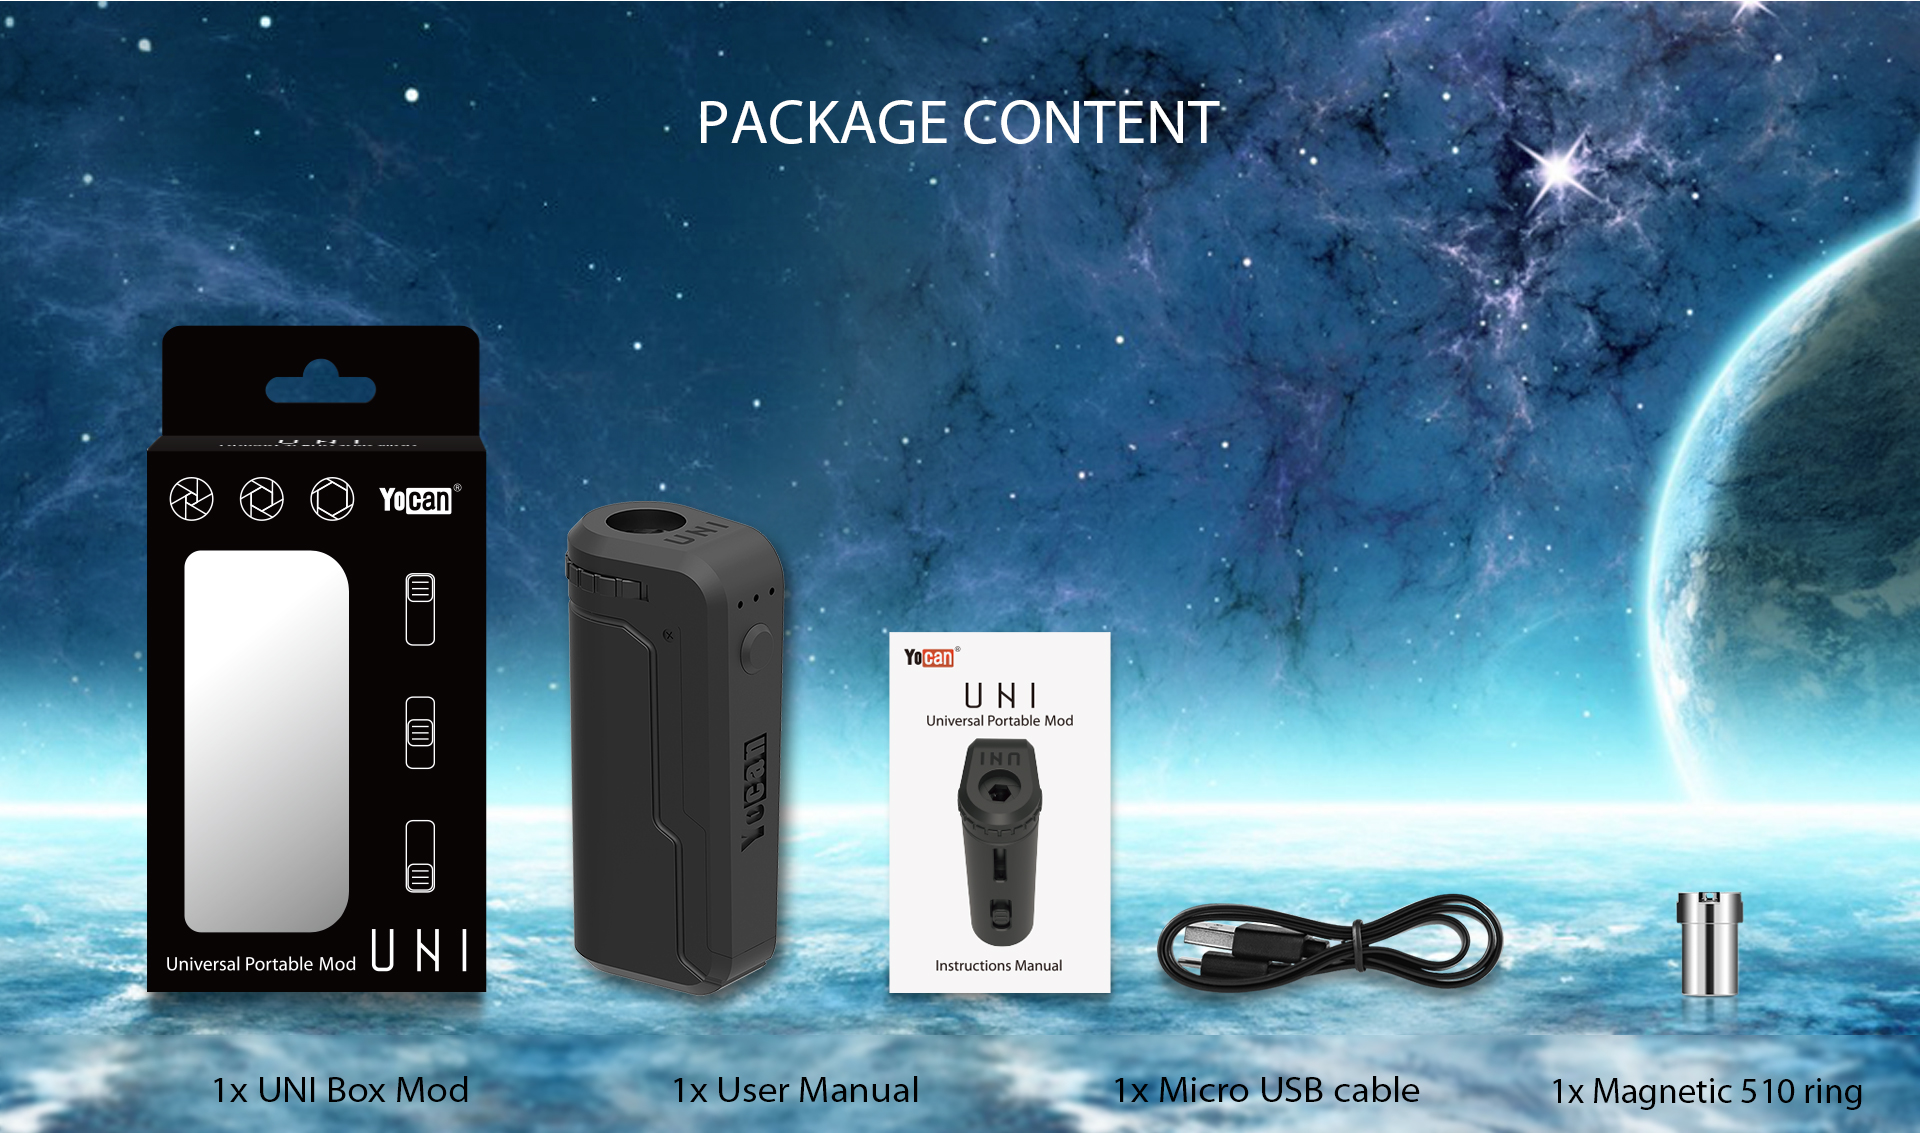 Package content of Yocan UNI Box Mod